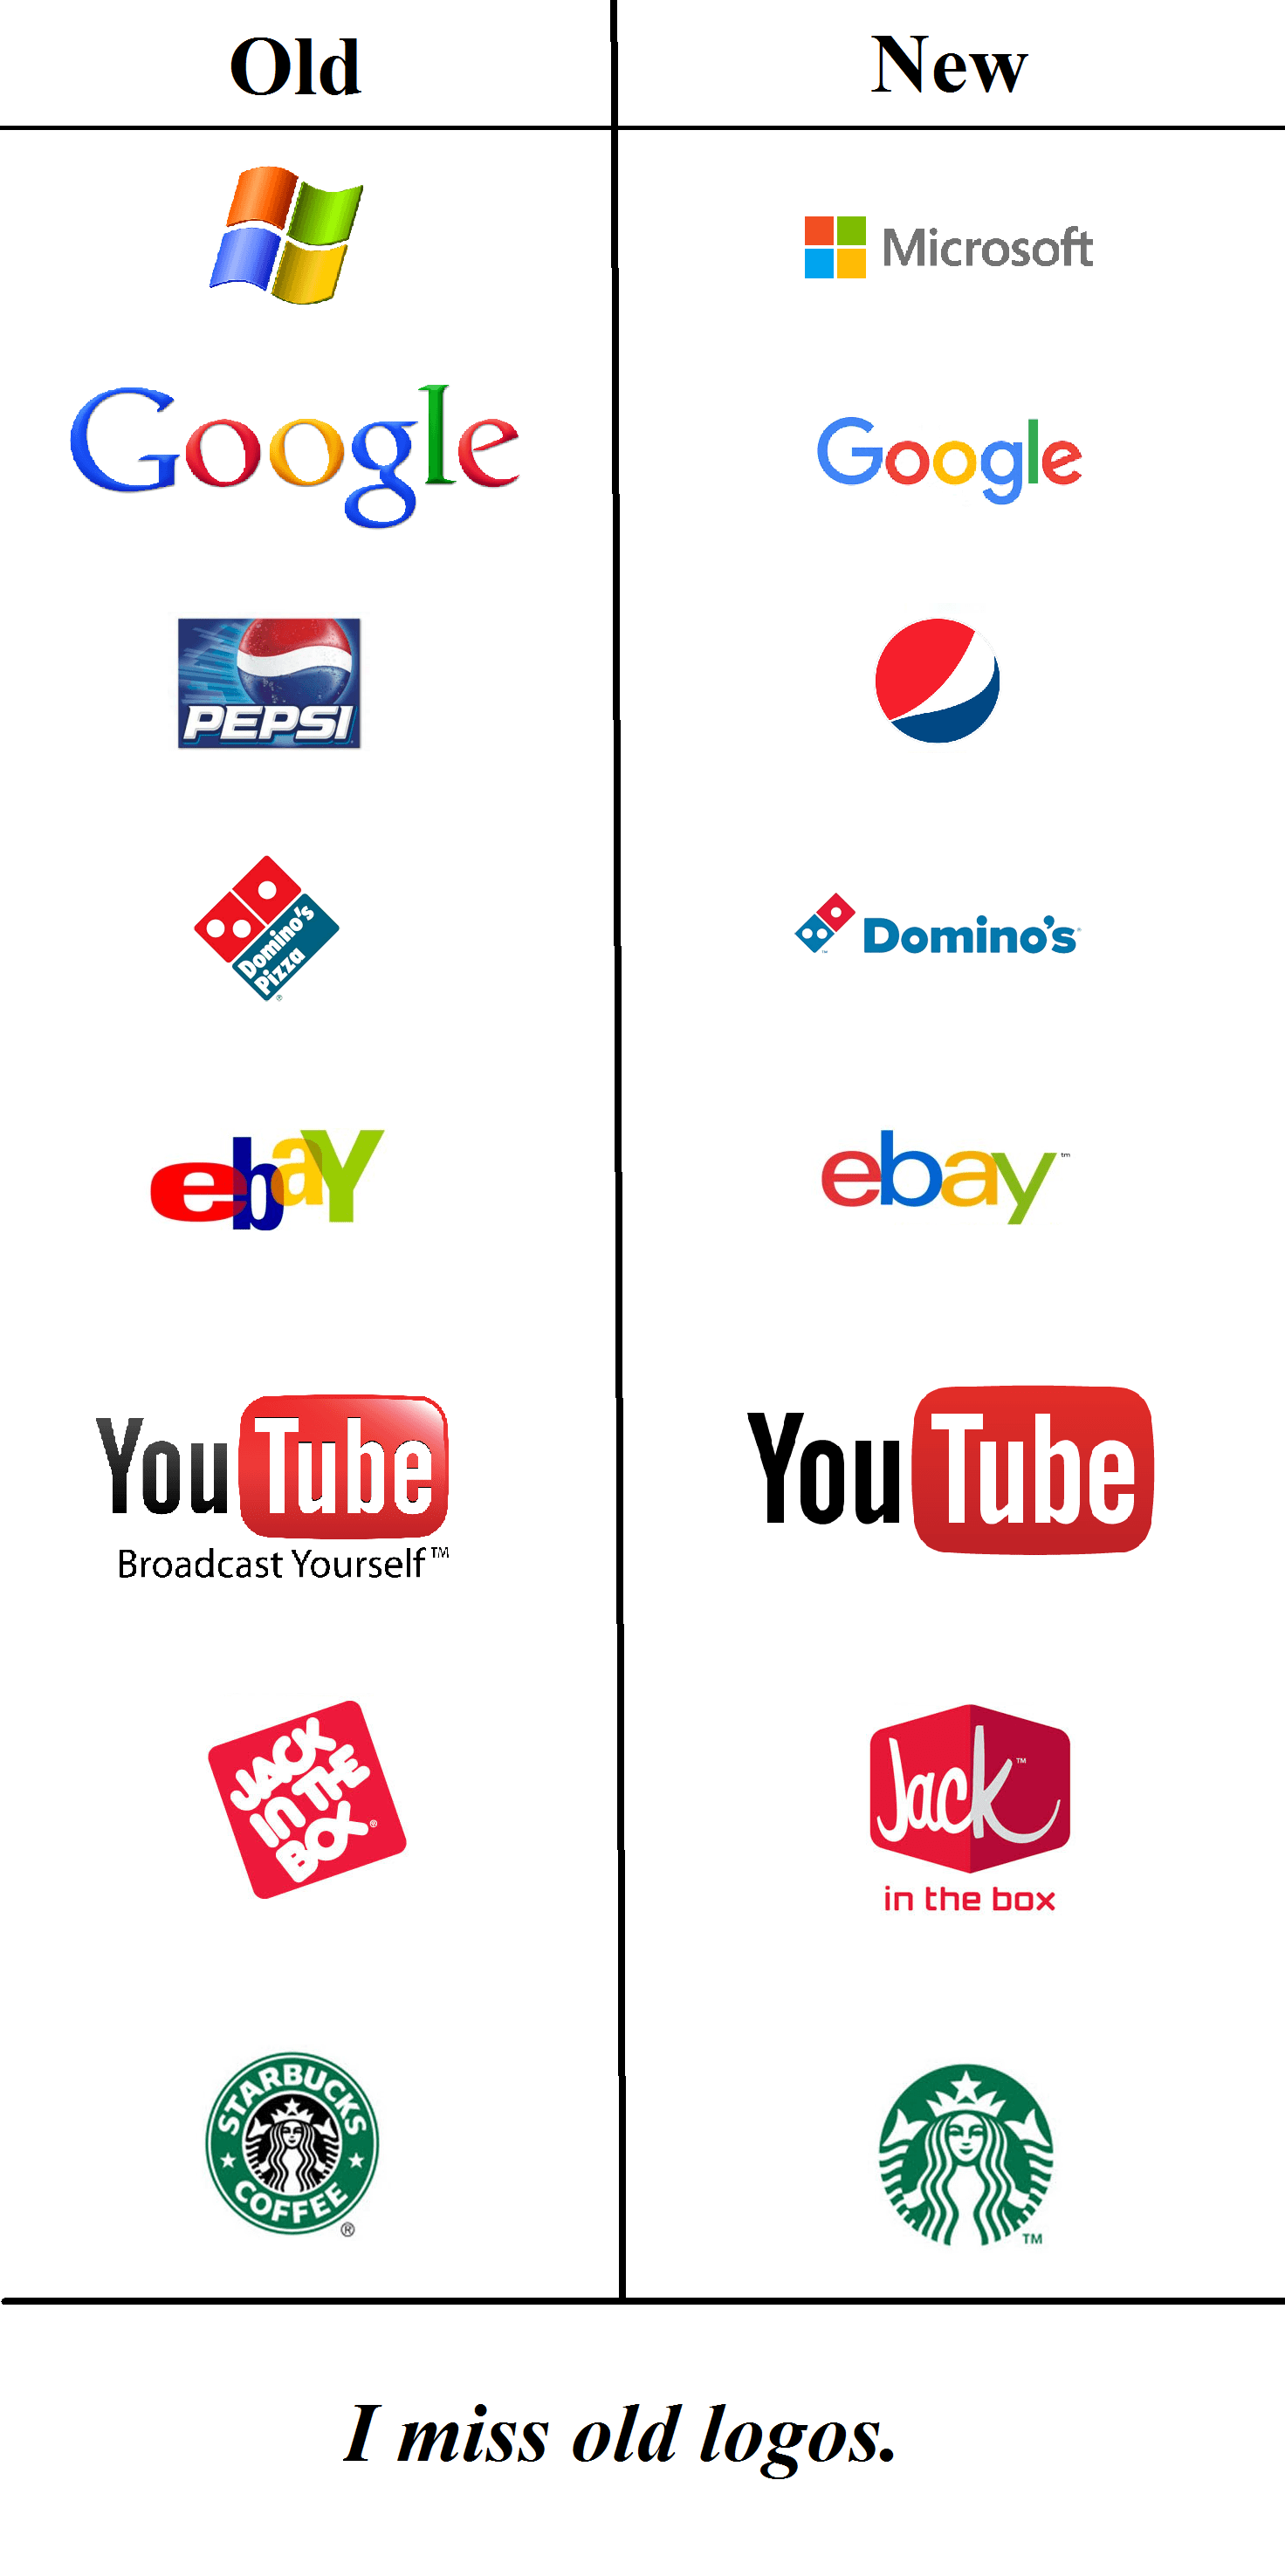 eBay Old Logo - The old logos were pretty cool. | Know Your Meme